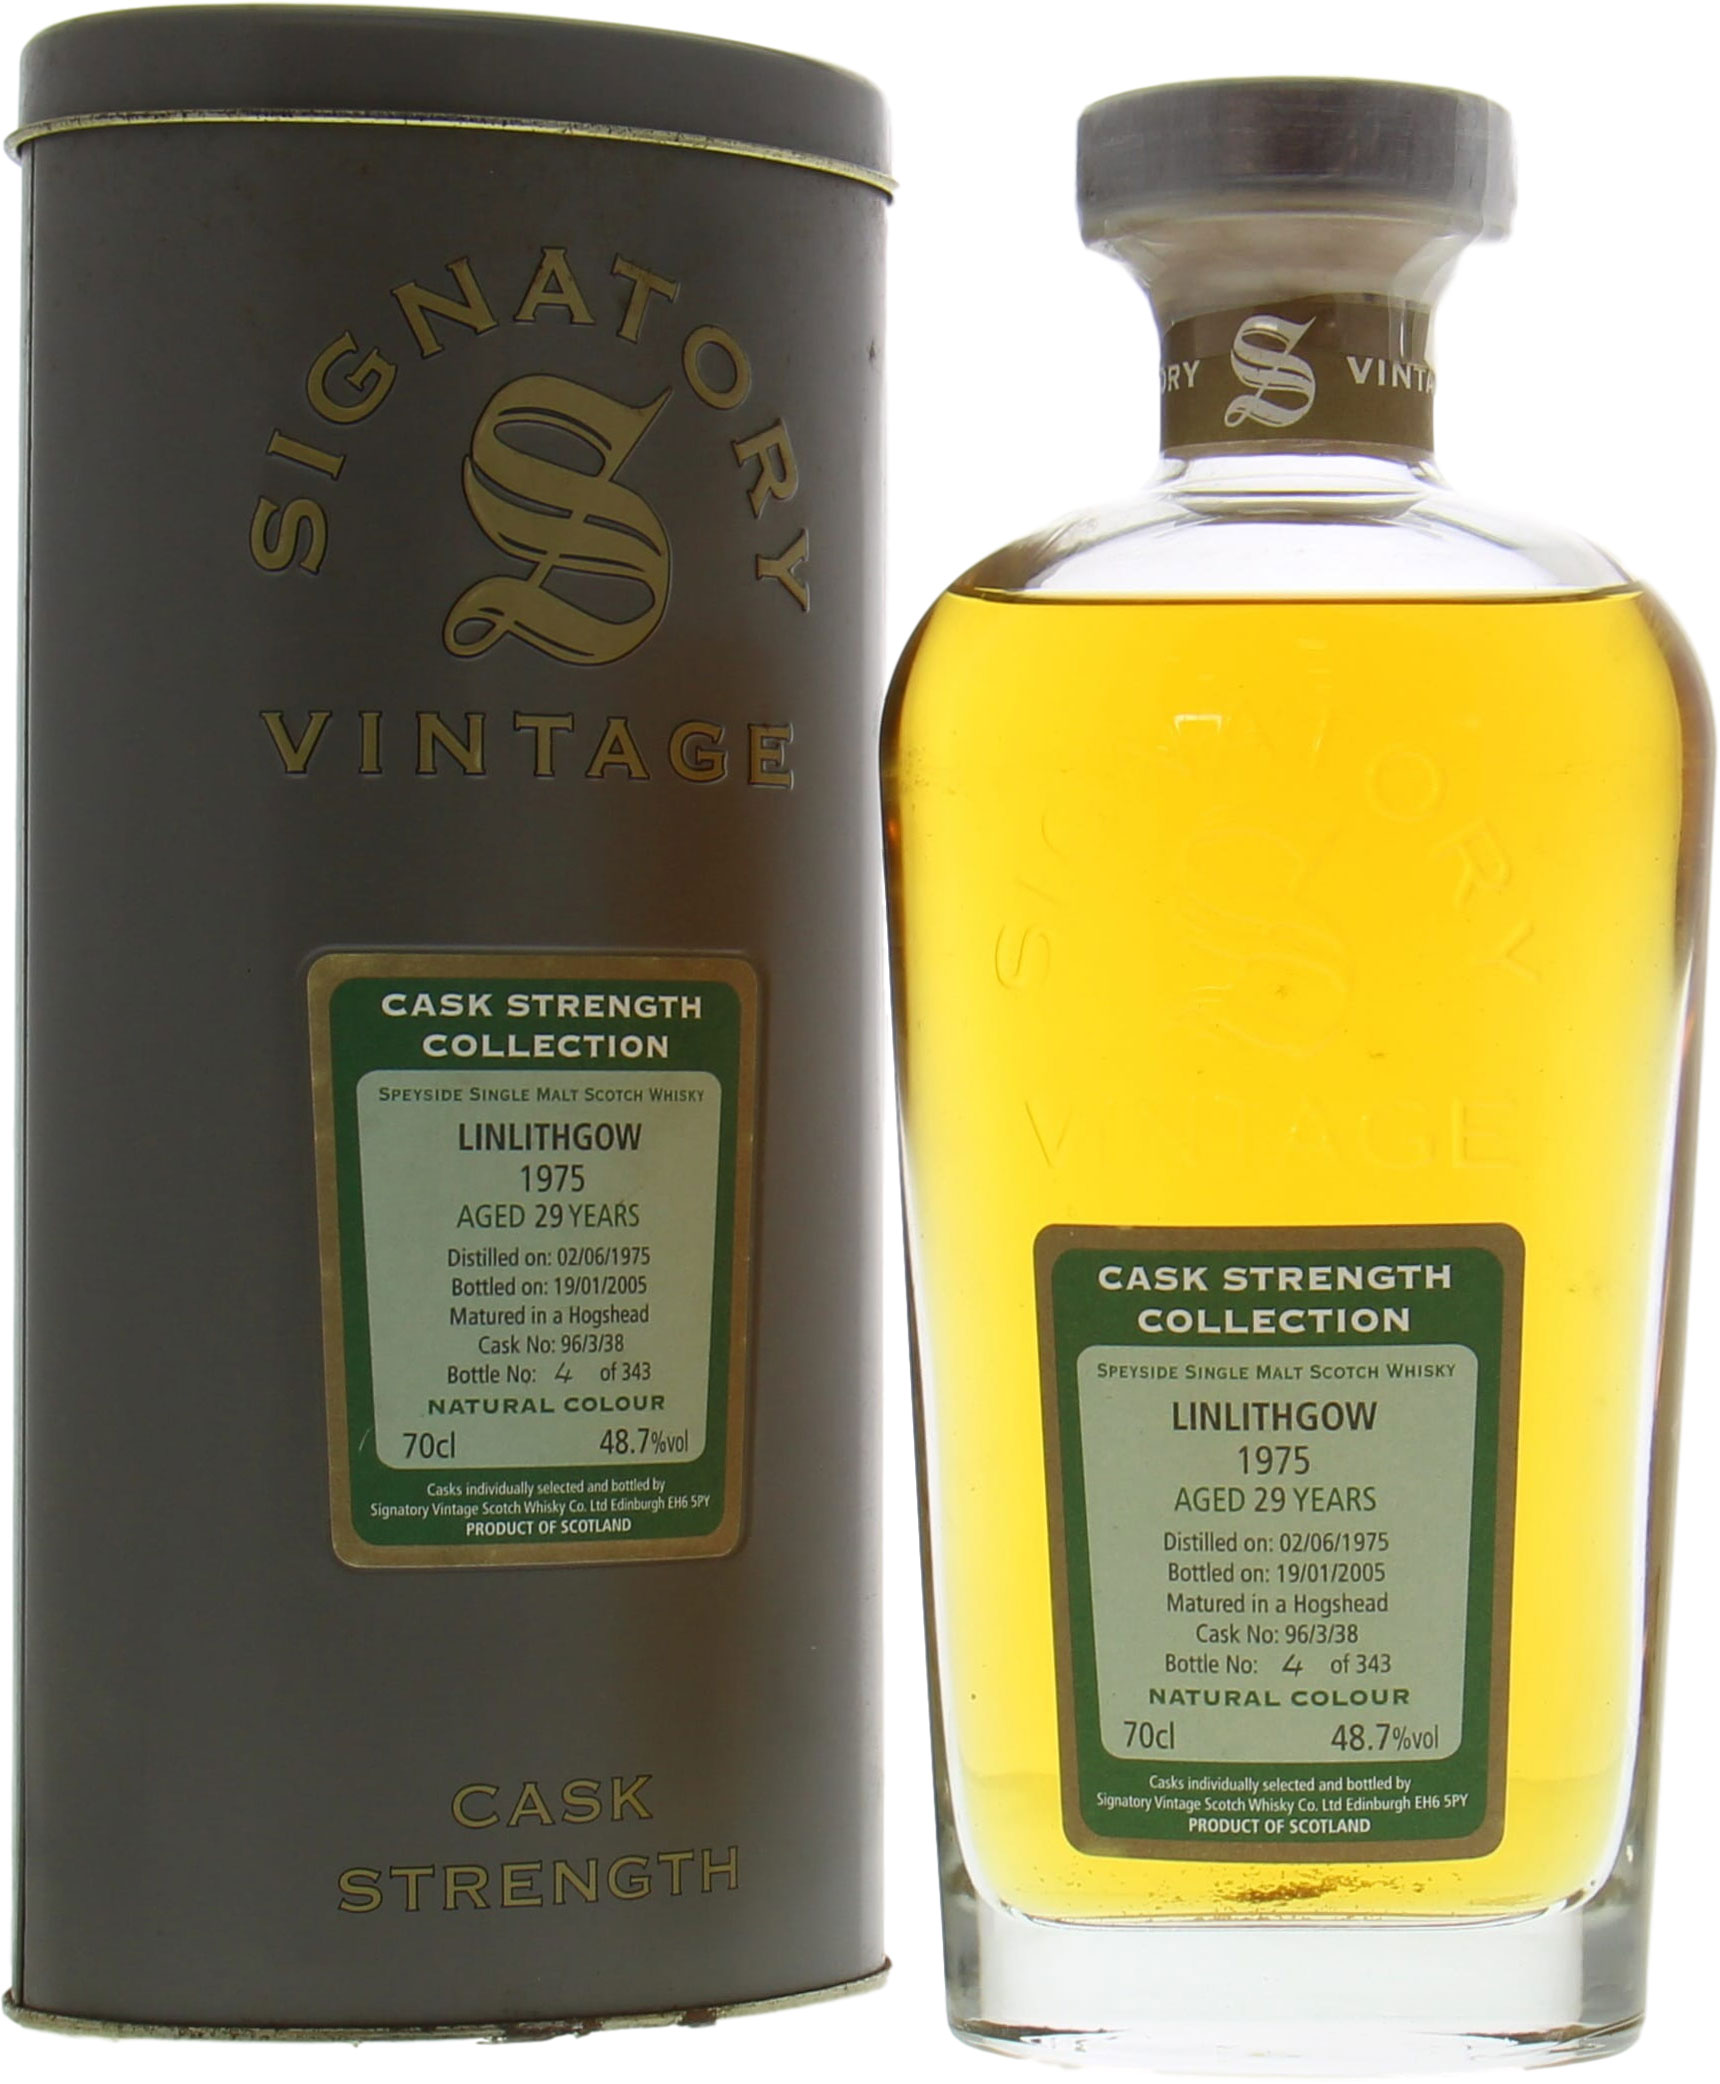 St. Magdalene - Linlithgow 29 Years Old Signatory vintage Cask 96/3/38 48.7% 1975 In Original Container